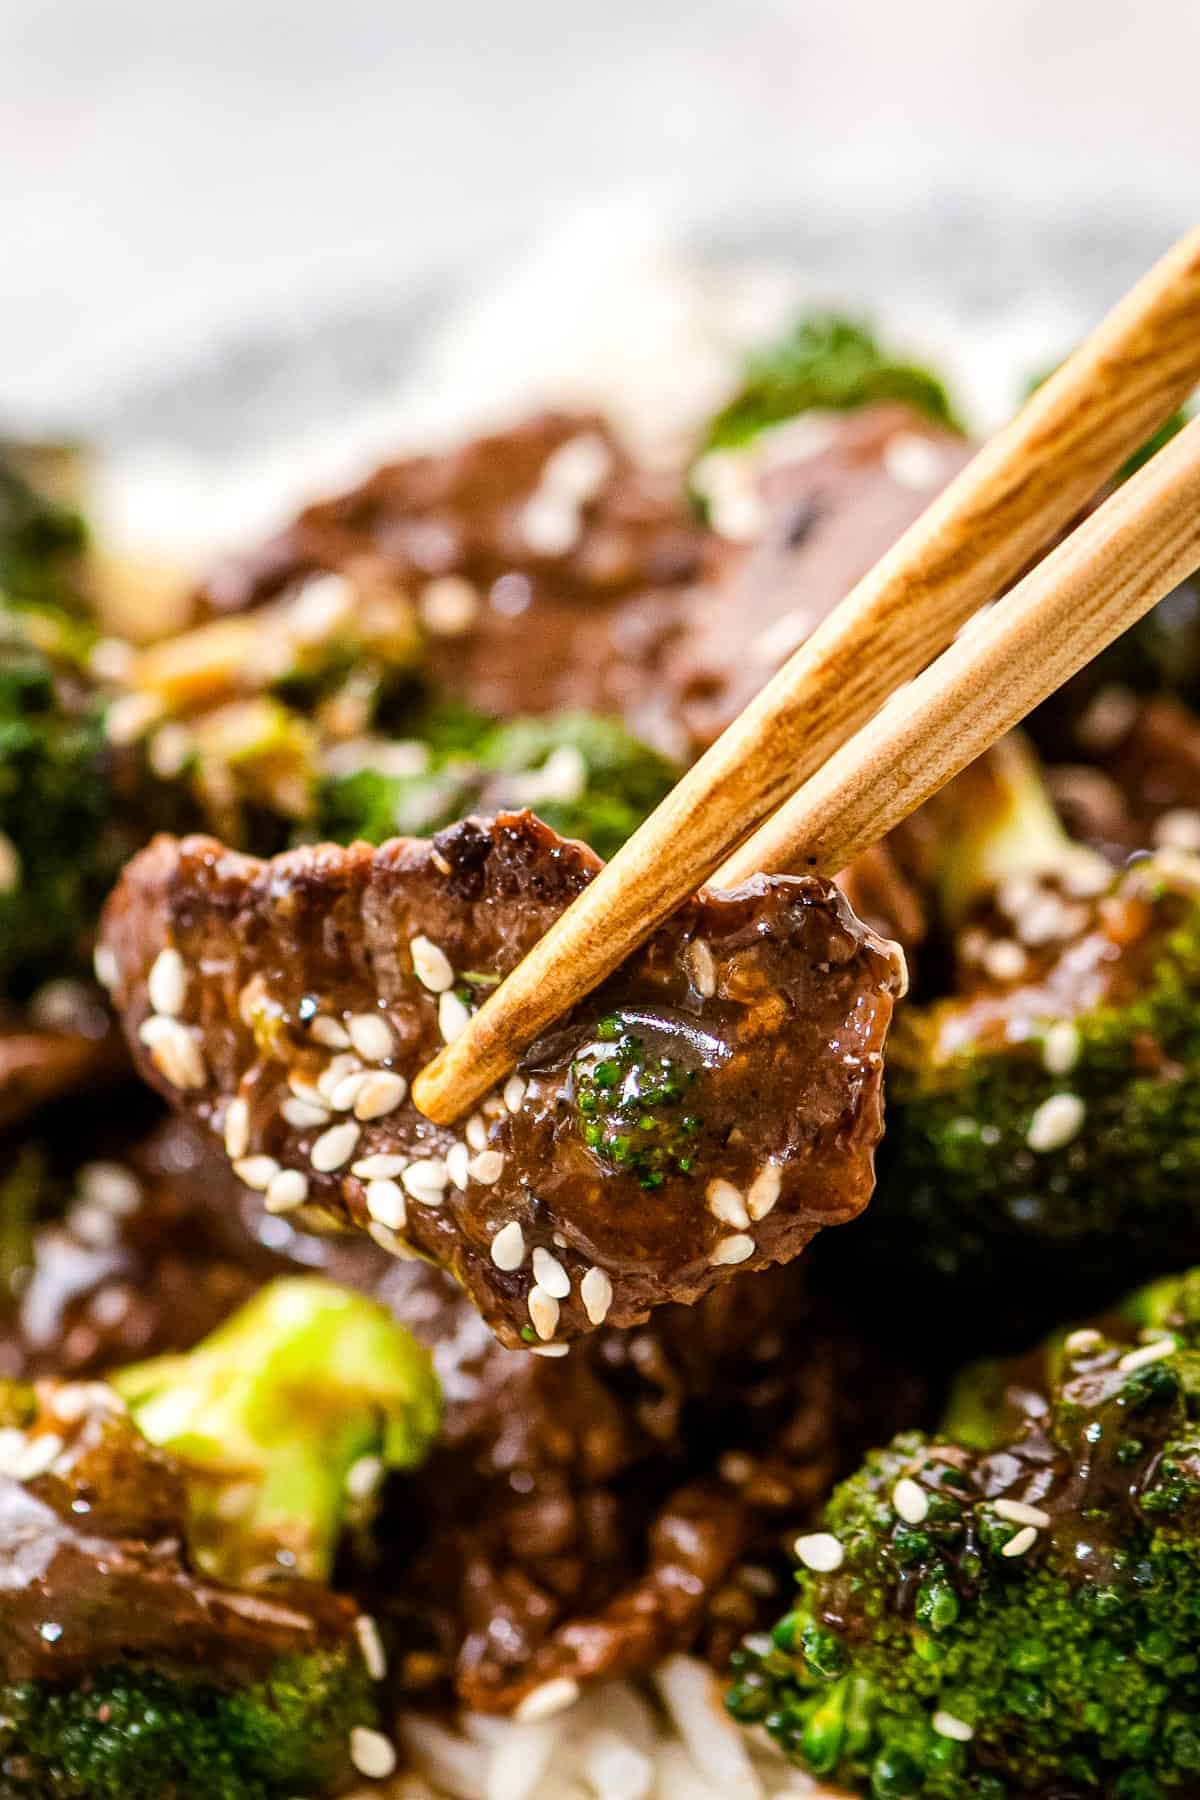 Chopstick holding a piece of beef and broccoli